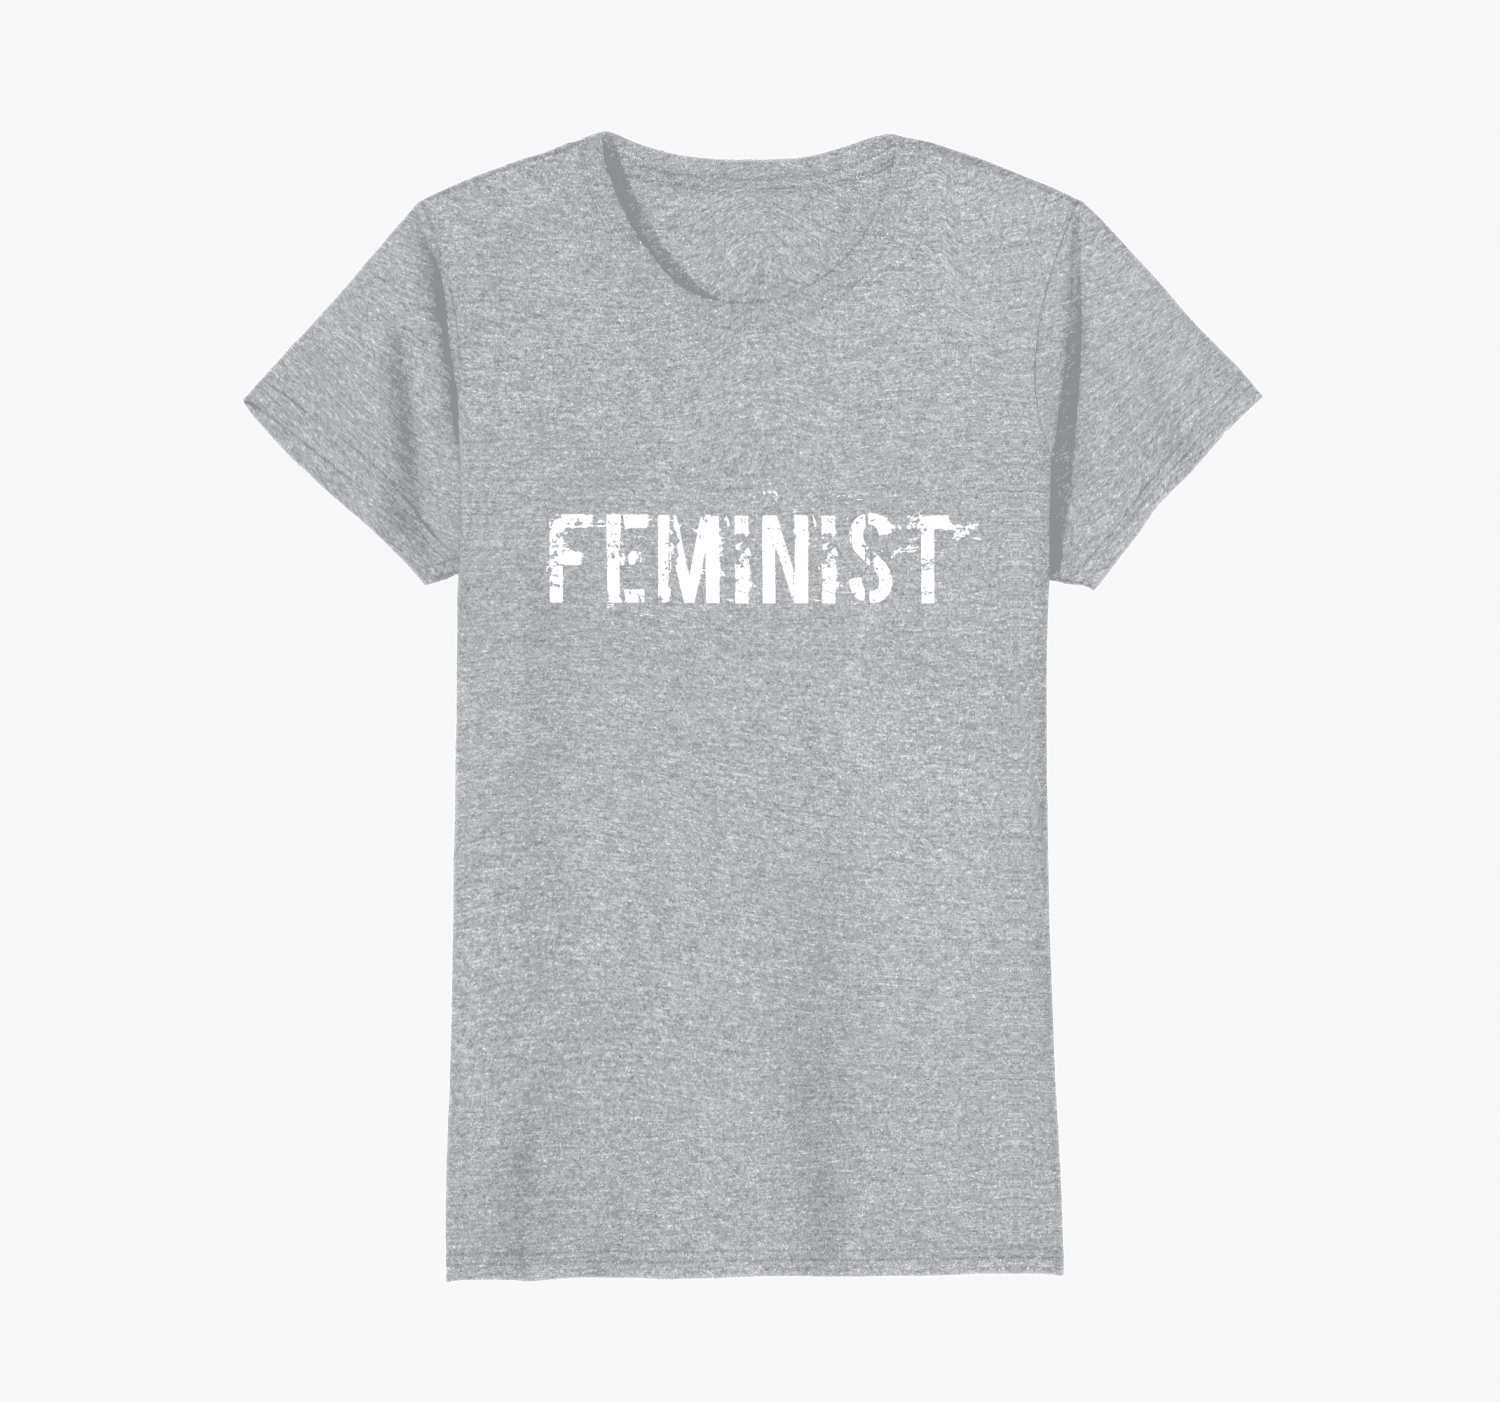 Feminist T-Shirt Gift for Wife 2018 - Gifts for Her